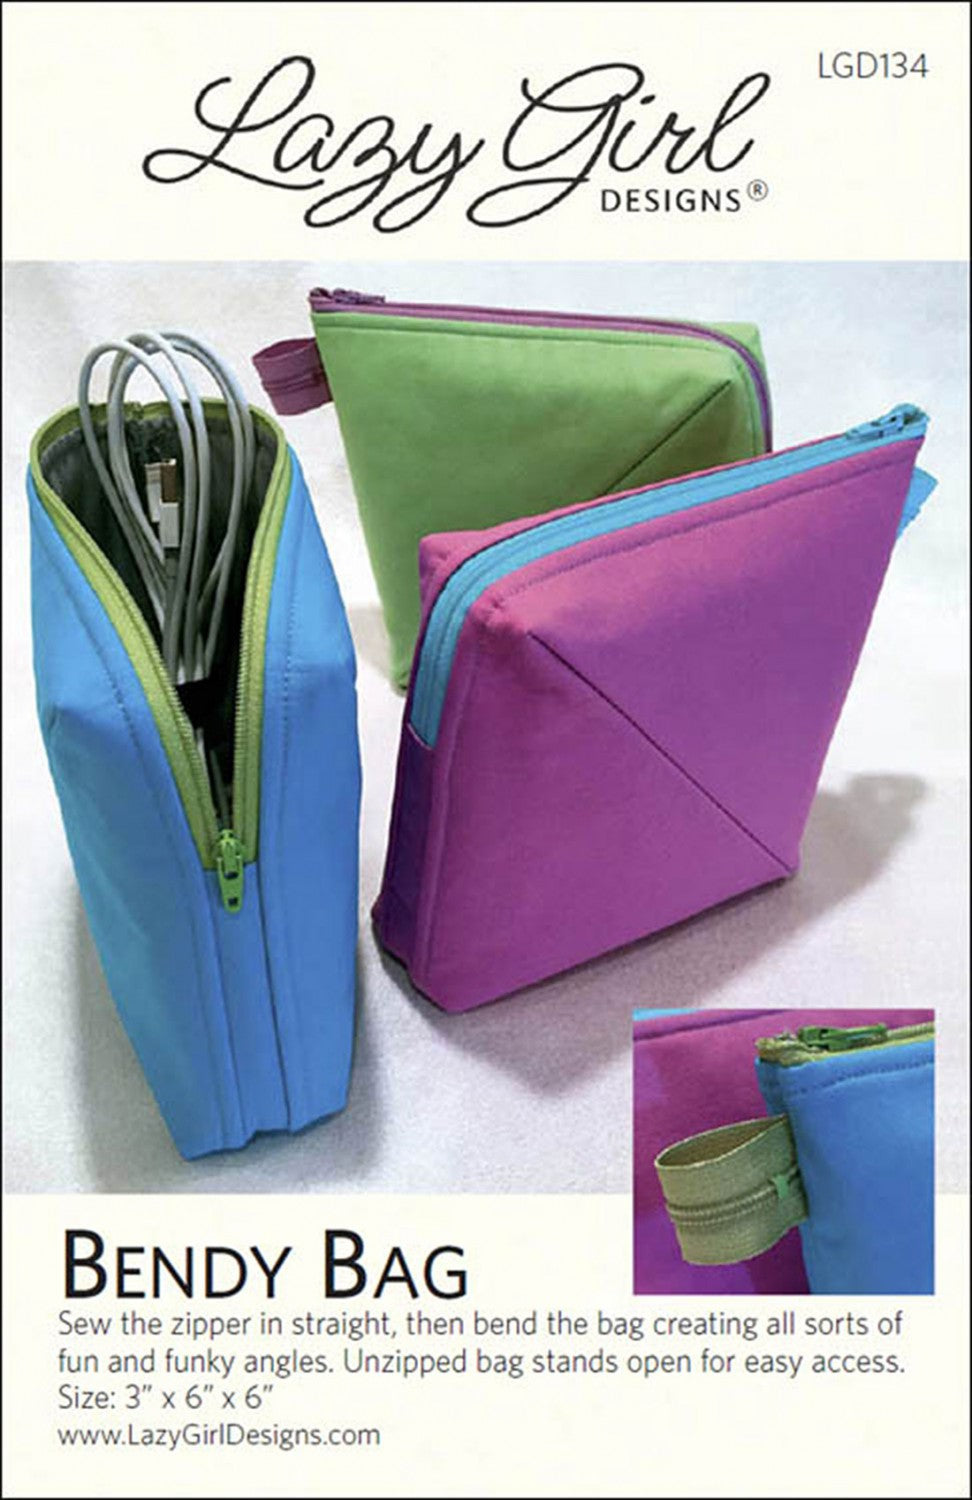 BENDY BAG from Lazy Girl Designs